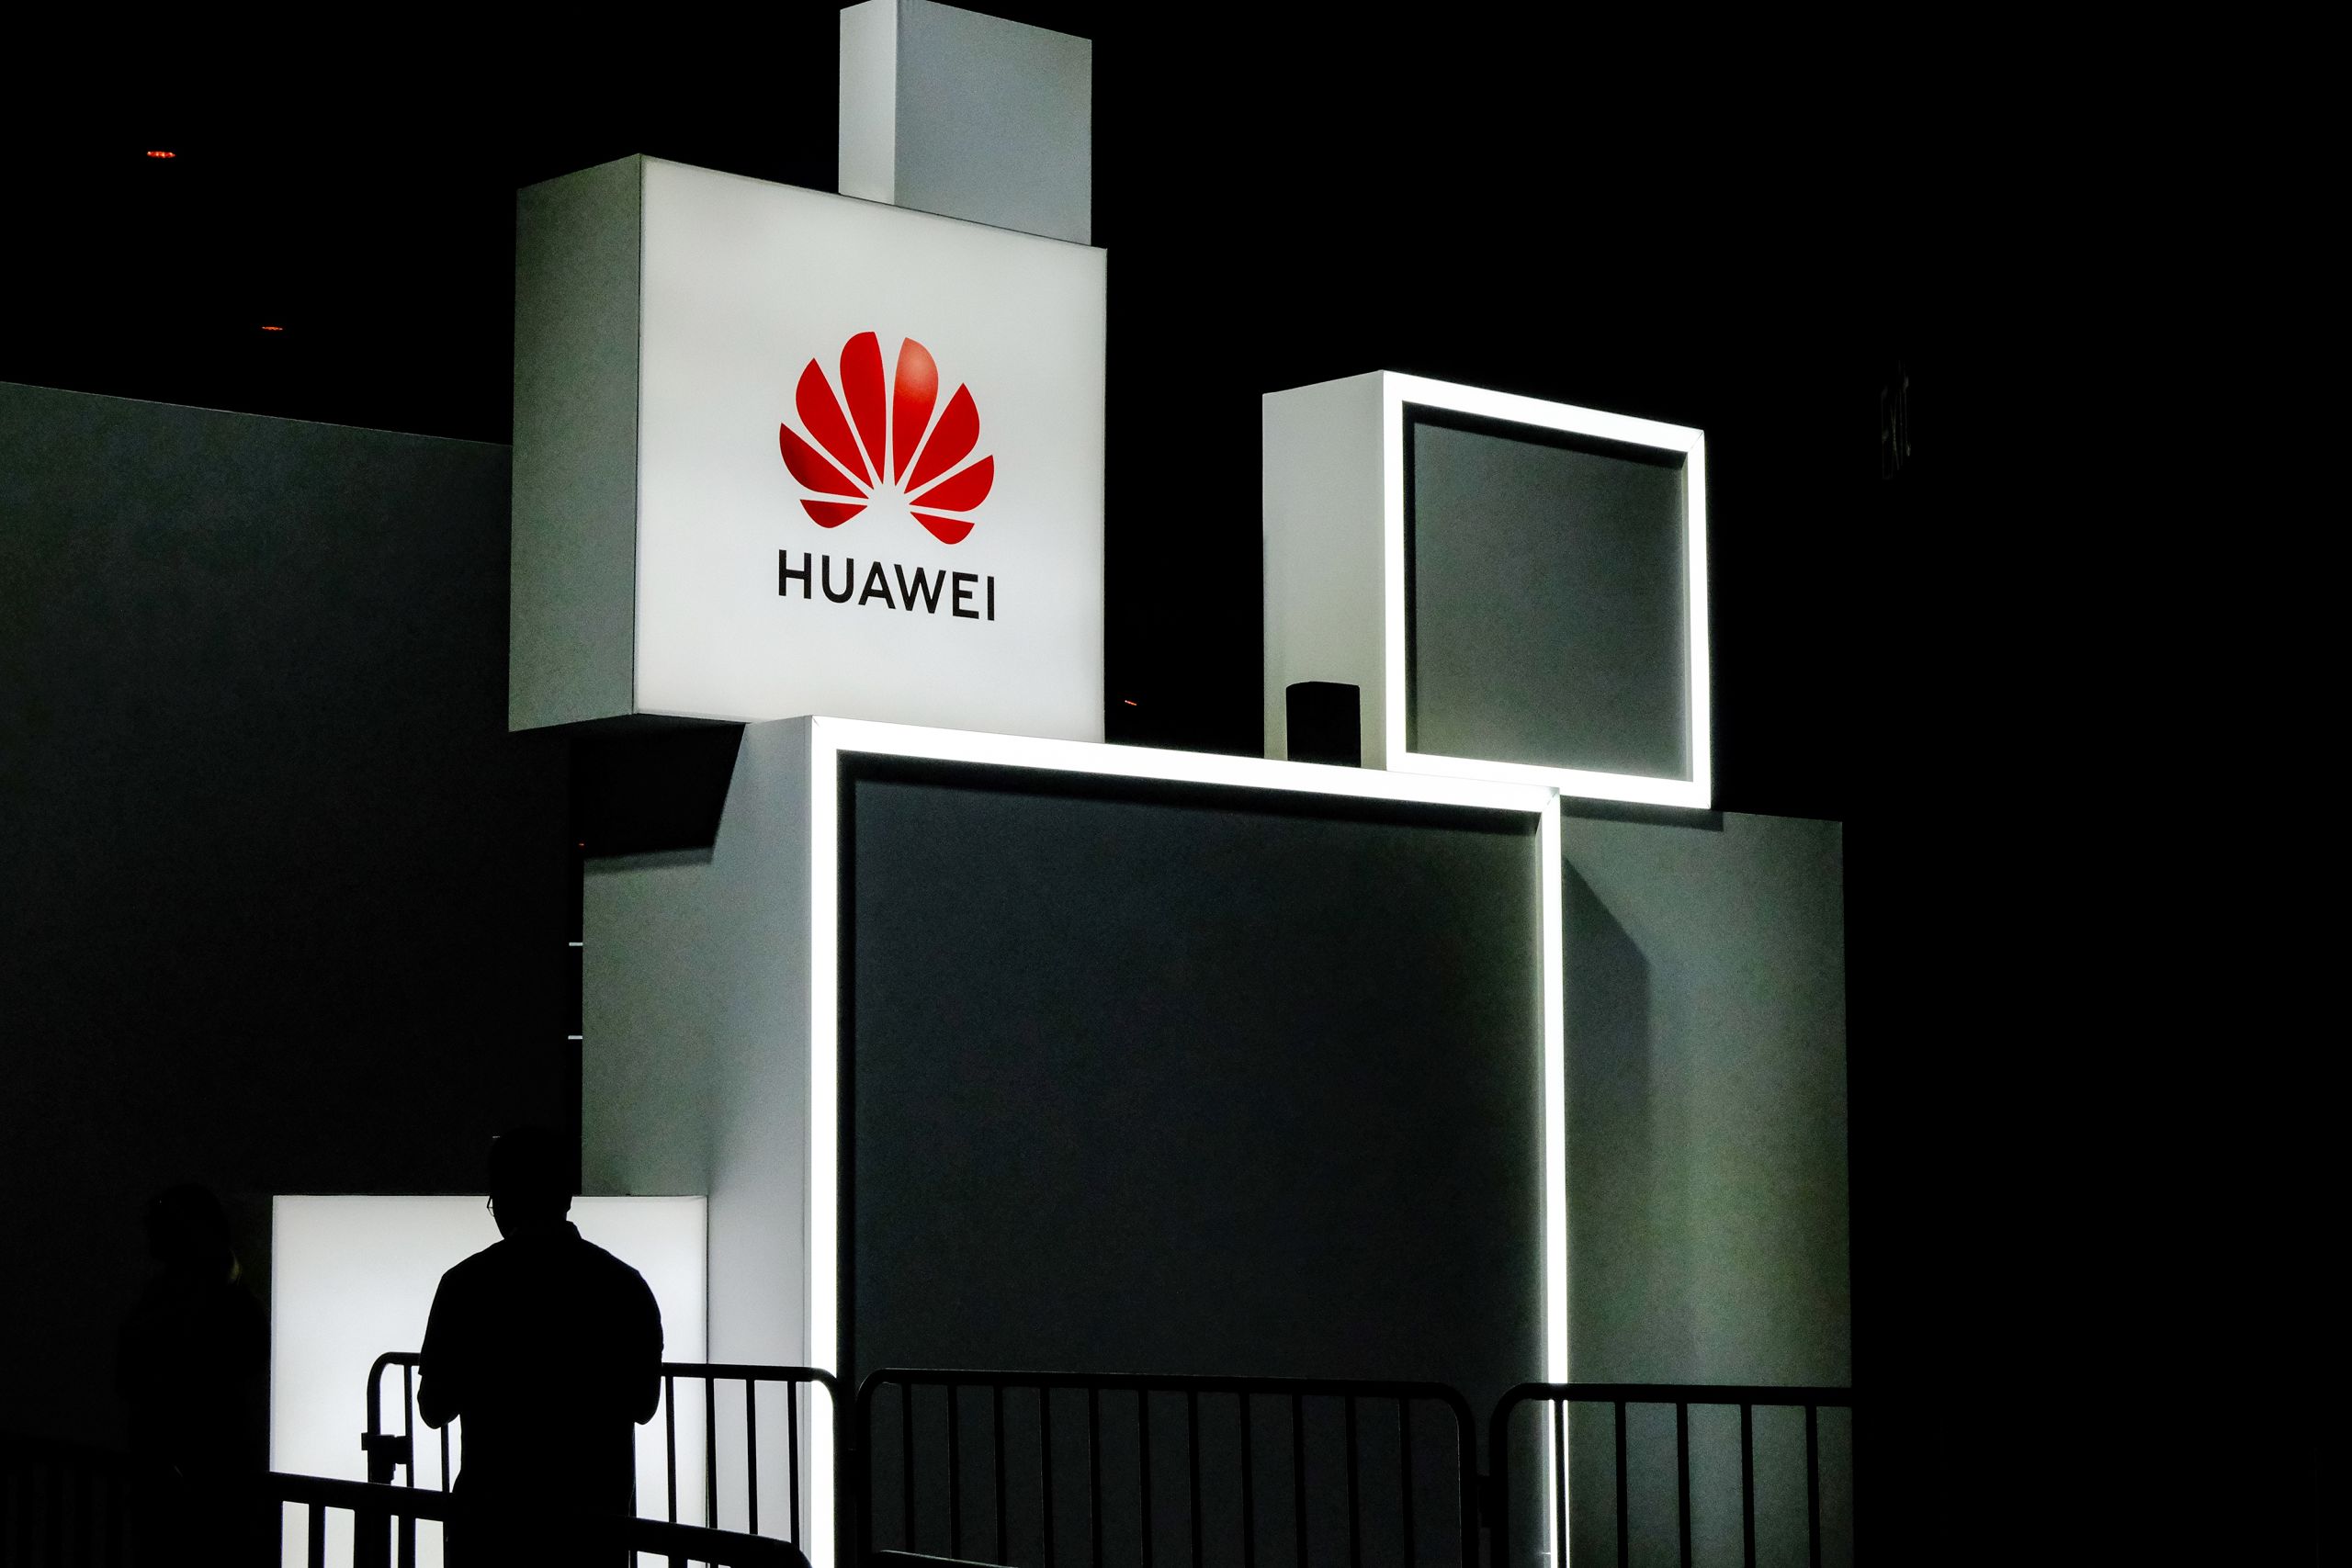 2019-09-18 09:33:44 A Huawei logo is seen during the 2019 Huawei Connect conference in Shanghai on September 18, 2019. Chinese telecom giant Huawei will step up its presence in the global market for computer hardware, a top company official said on September 18, as it weathers a US assault on the network gear and mobile phone segments in which it is already dominant. STR / AFP